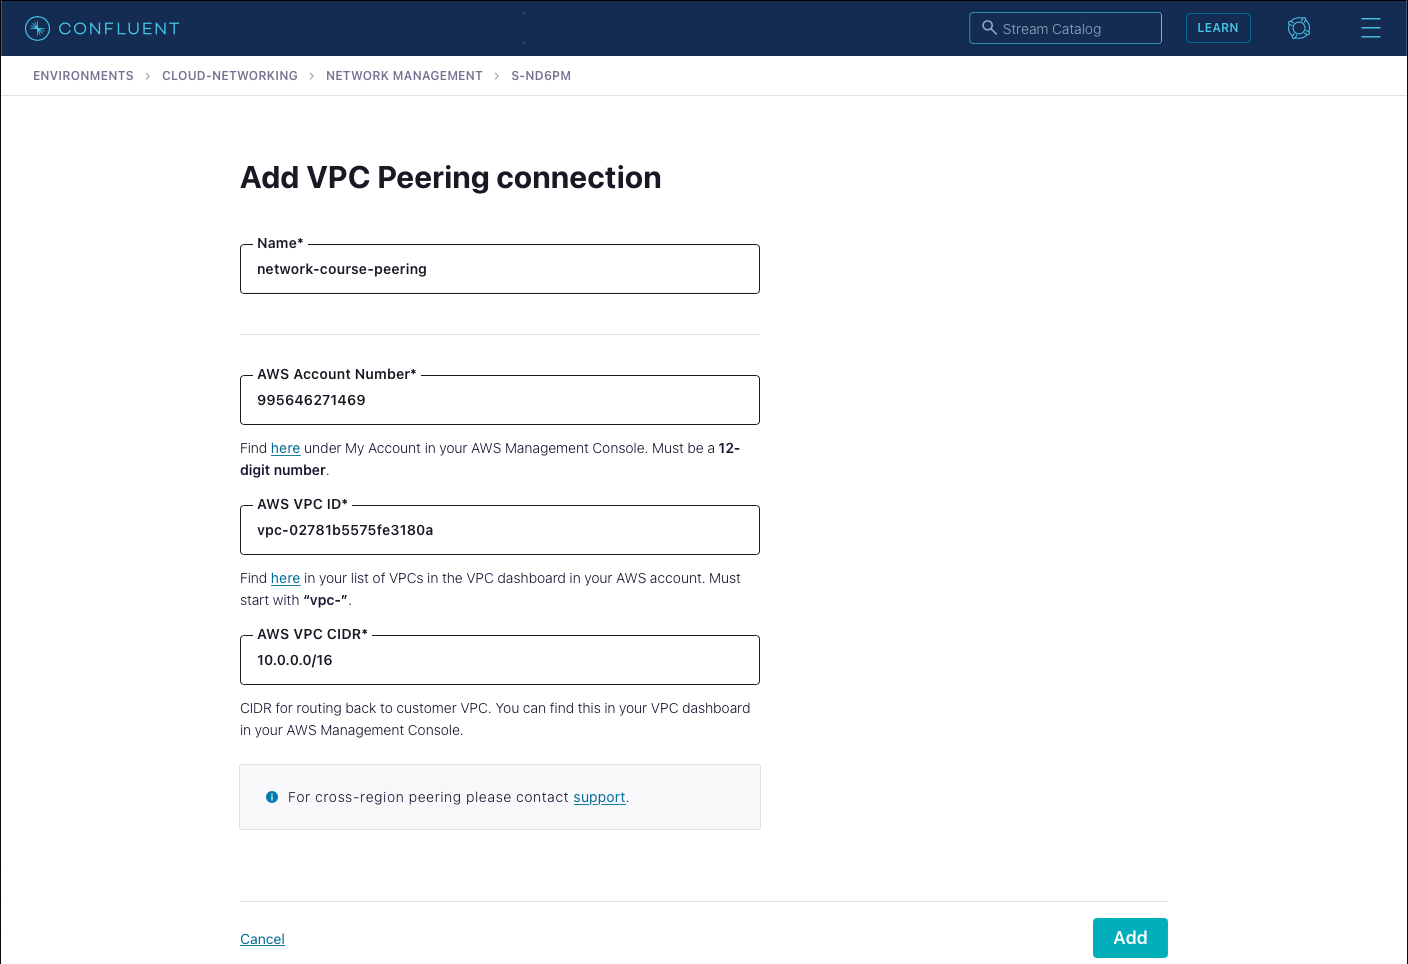 confluent-cloud-networking-add-vpc-peering-connection